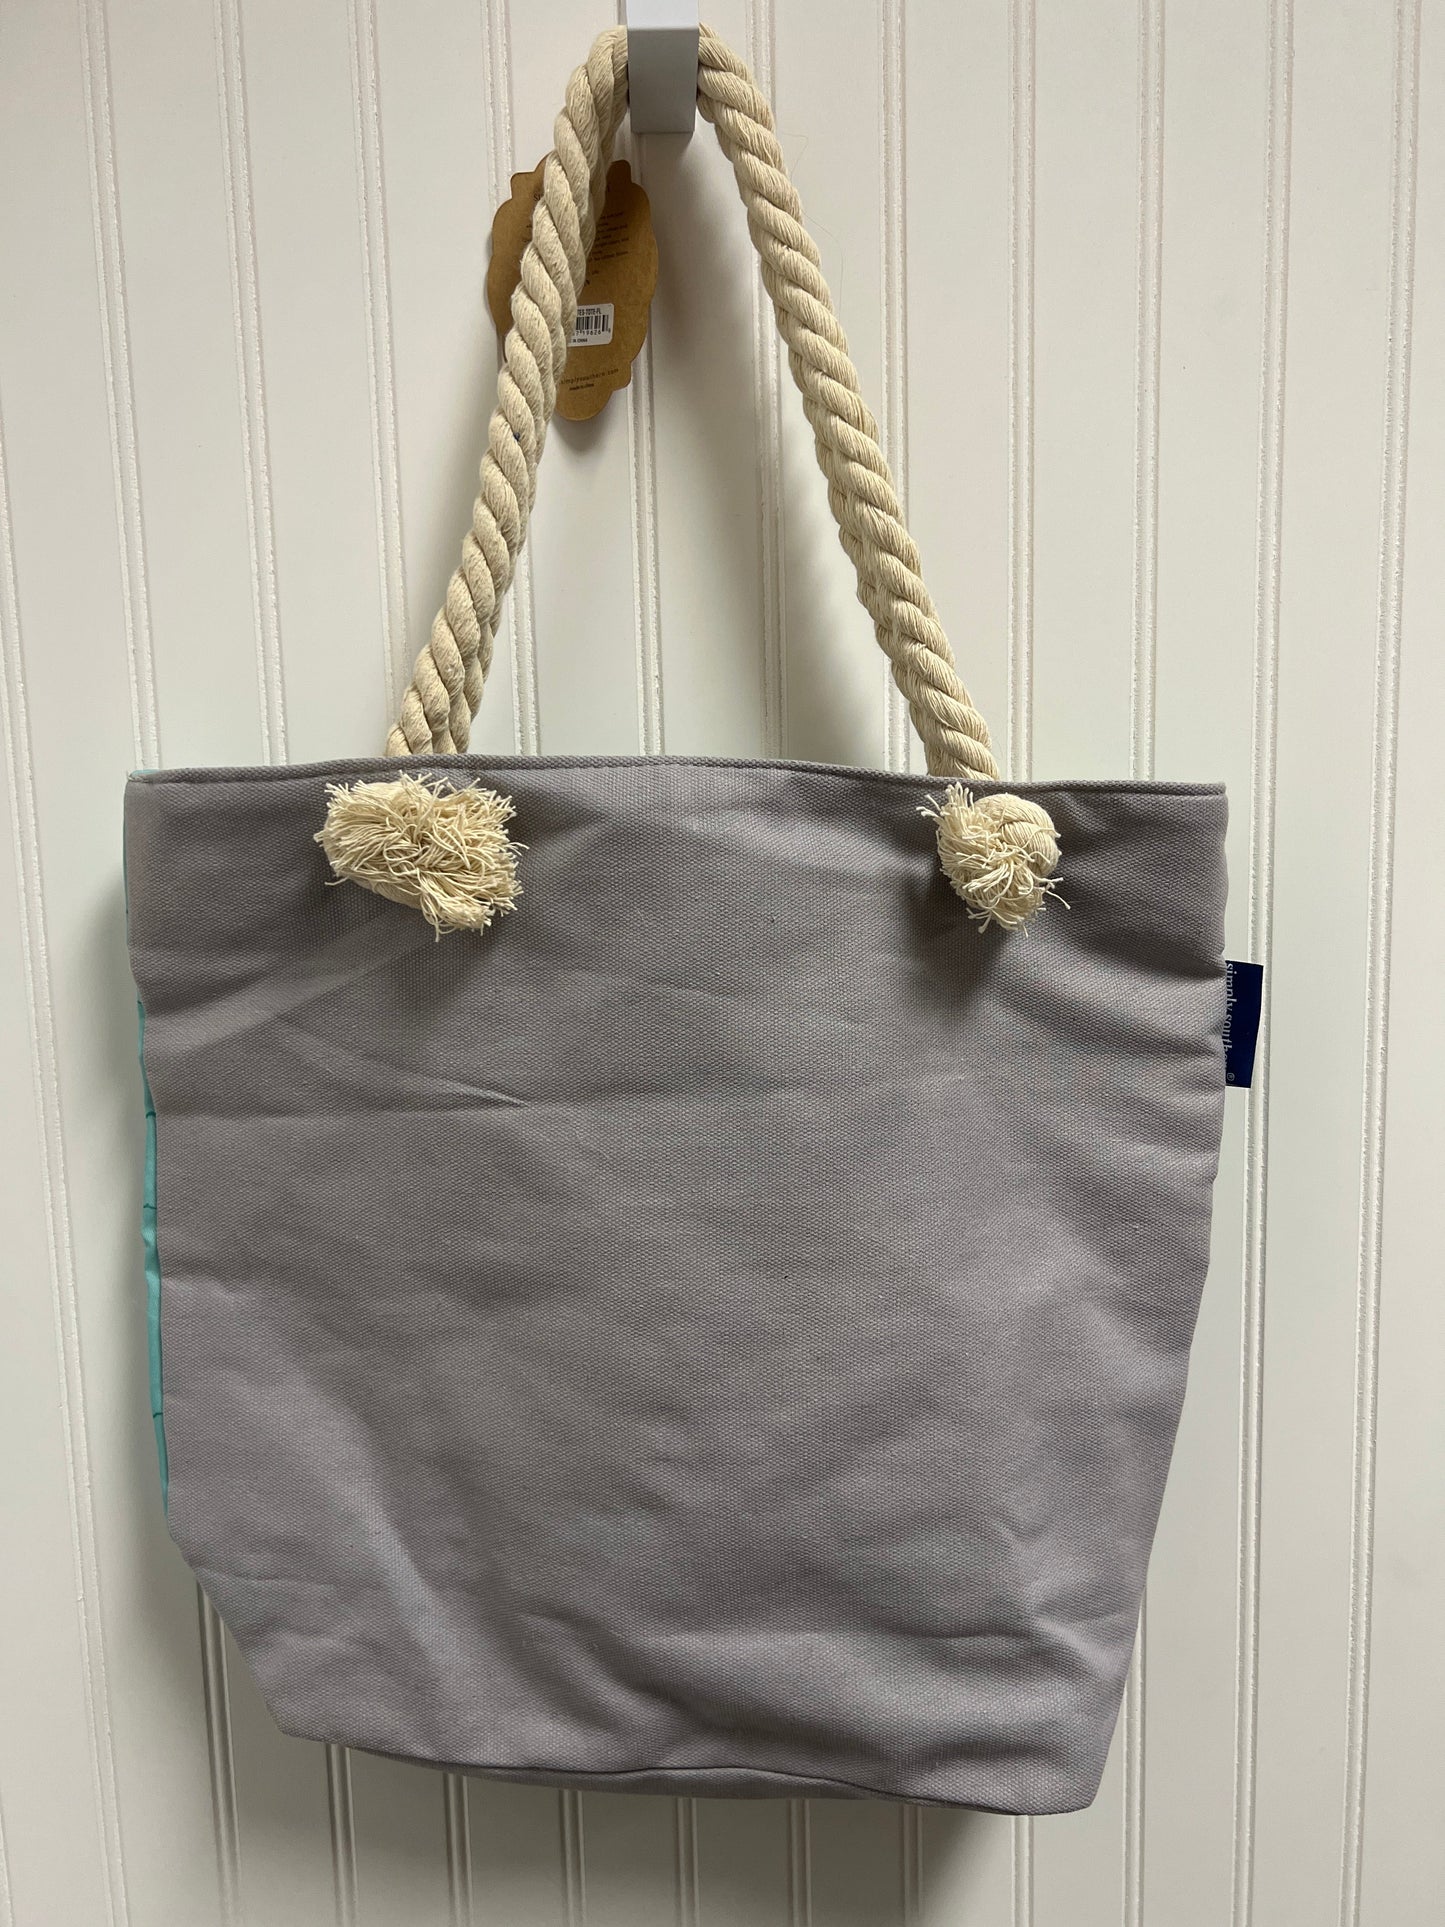 Tote Simply Southern, Size Medium